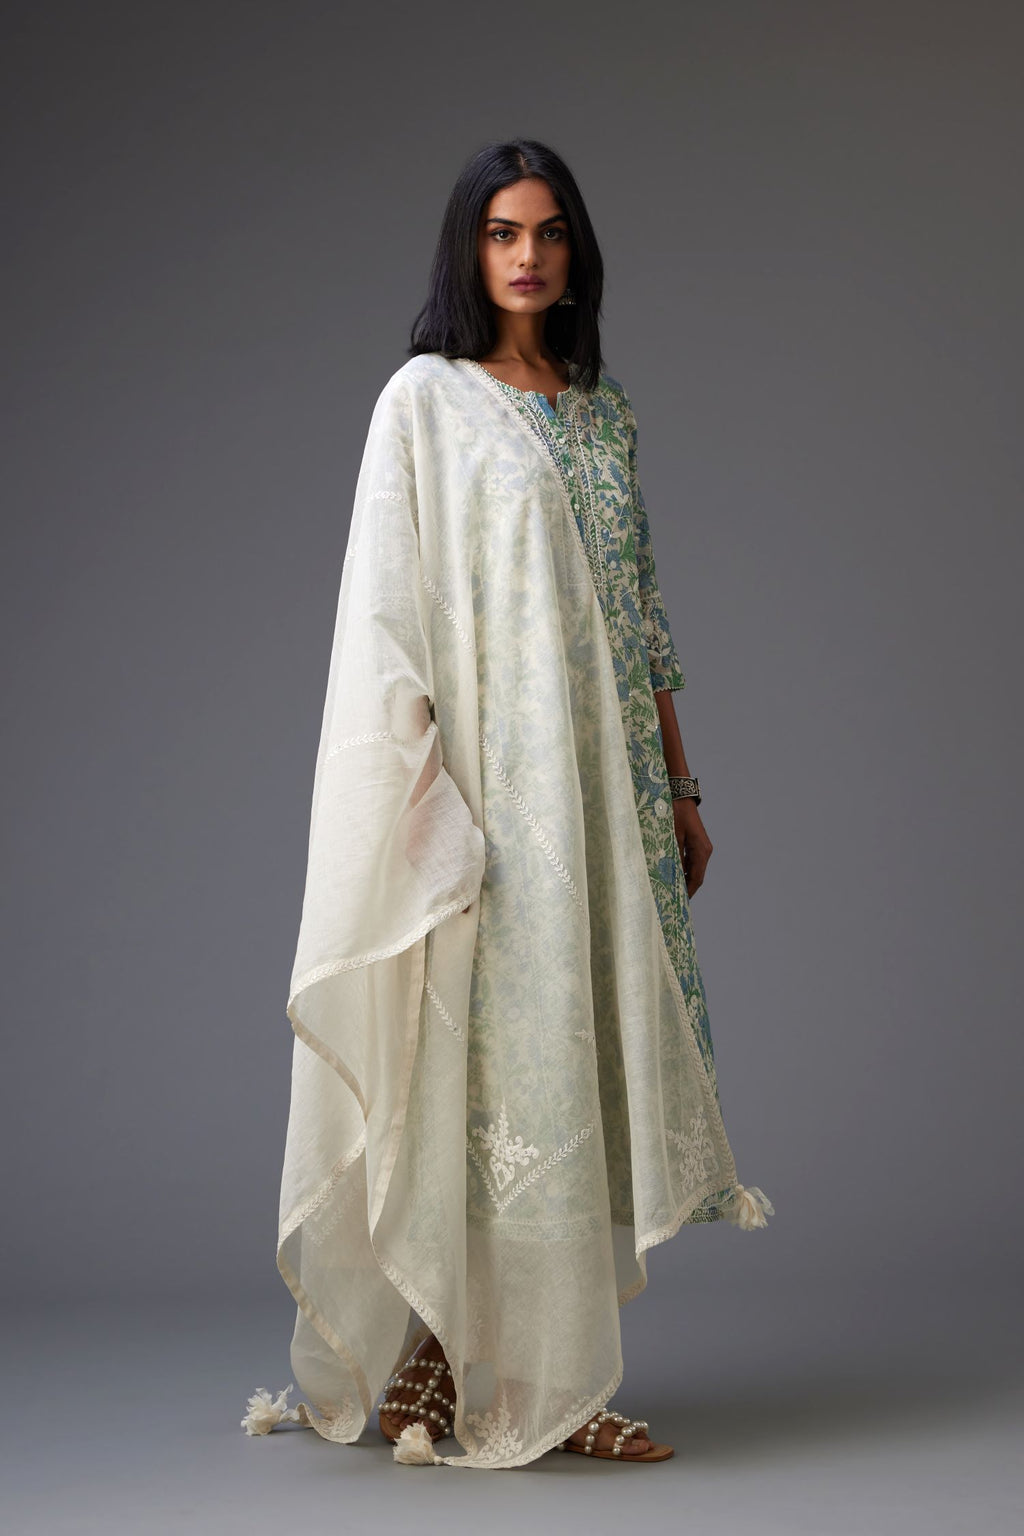 Off-white cotton chanderi dupatta with white dori embroidered border and bootas at all four corners.